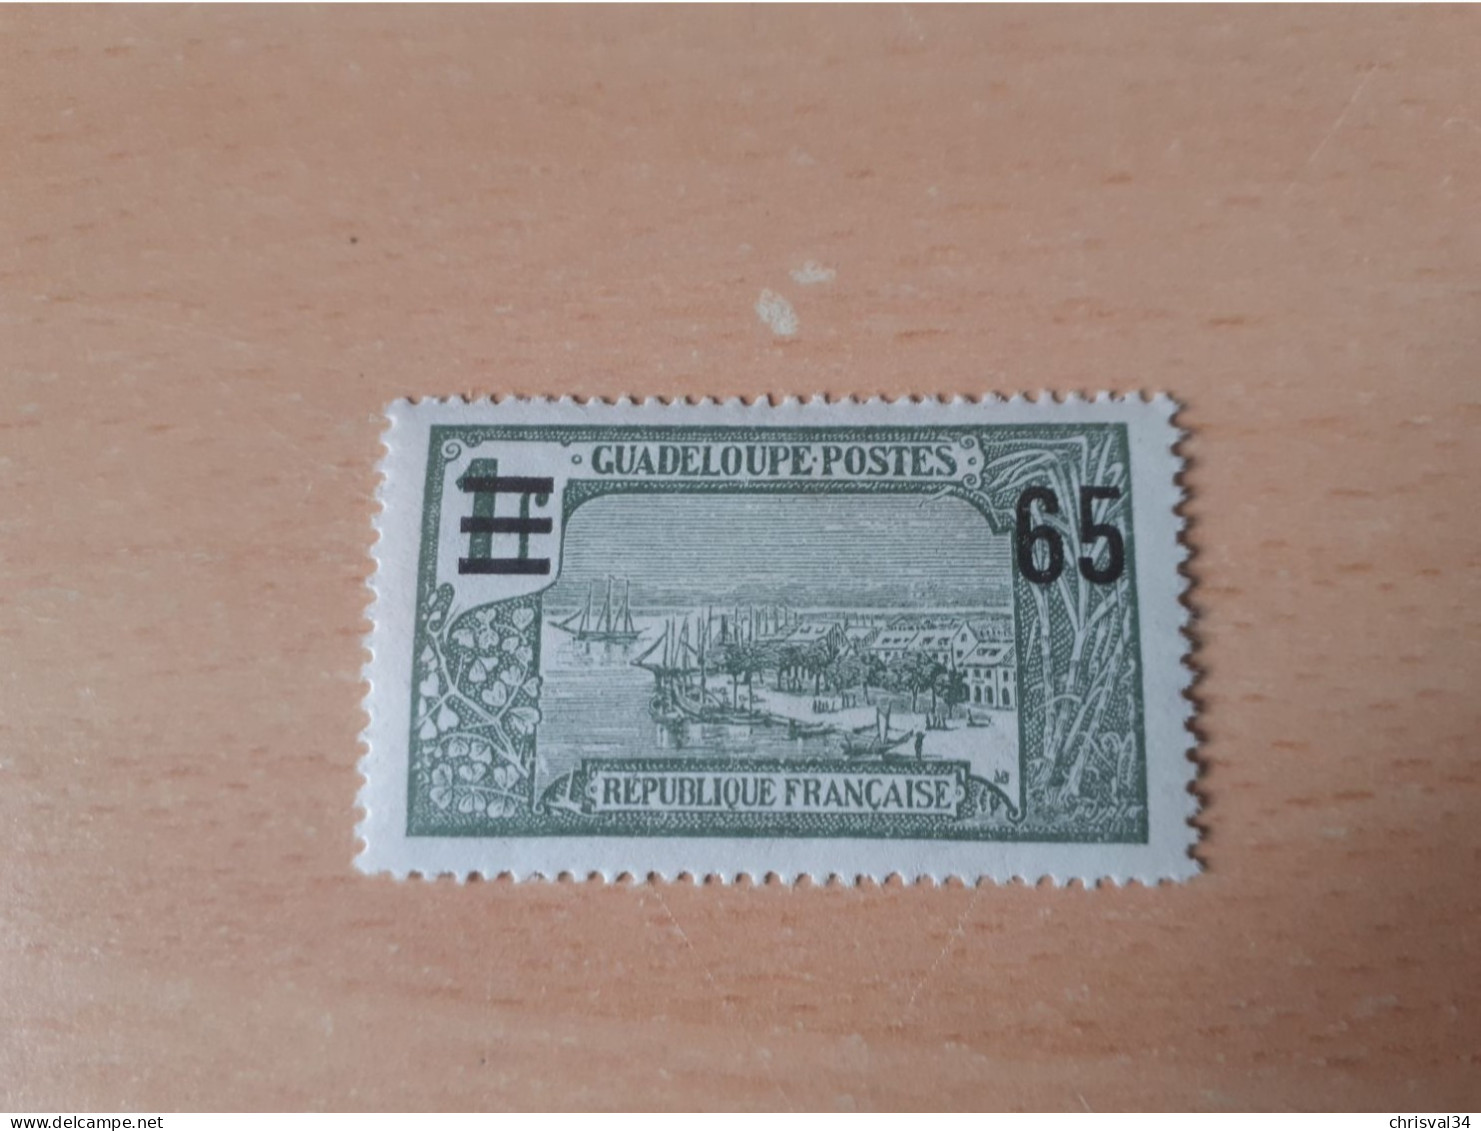 TIMBRE   GUADELOUPE       N  90     COTE  2,50   EUROS  NEUF  SANS  CHARNIERE - Nuovi